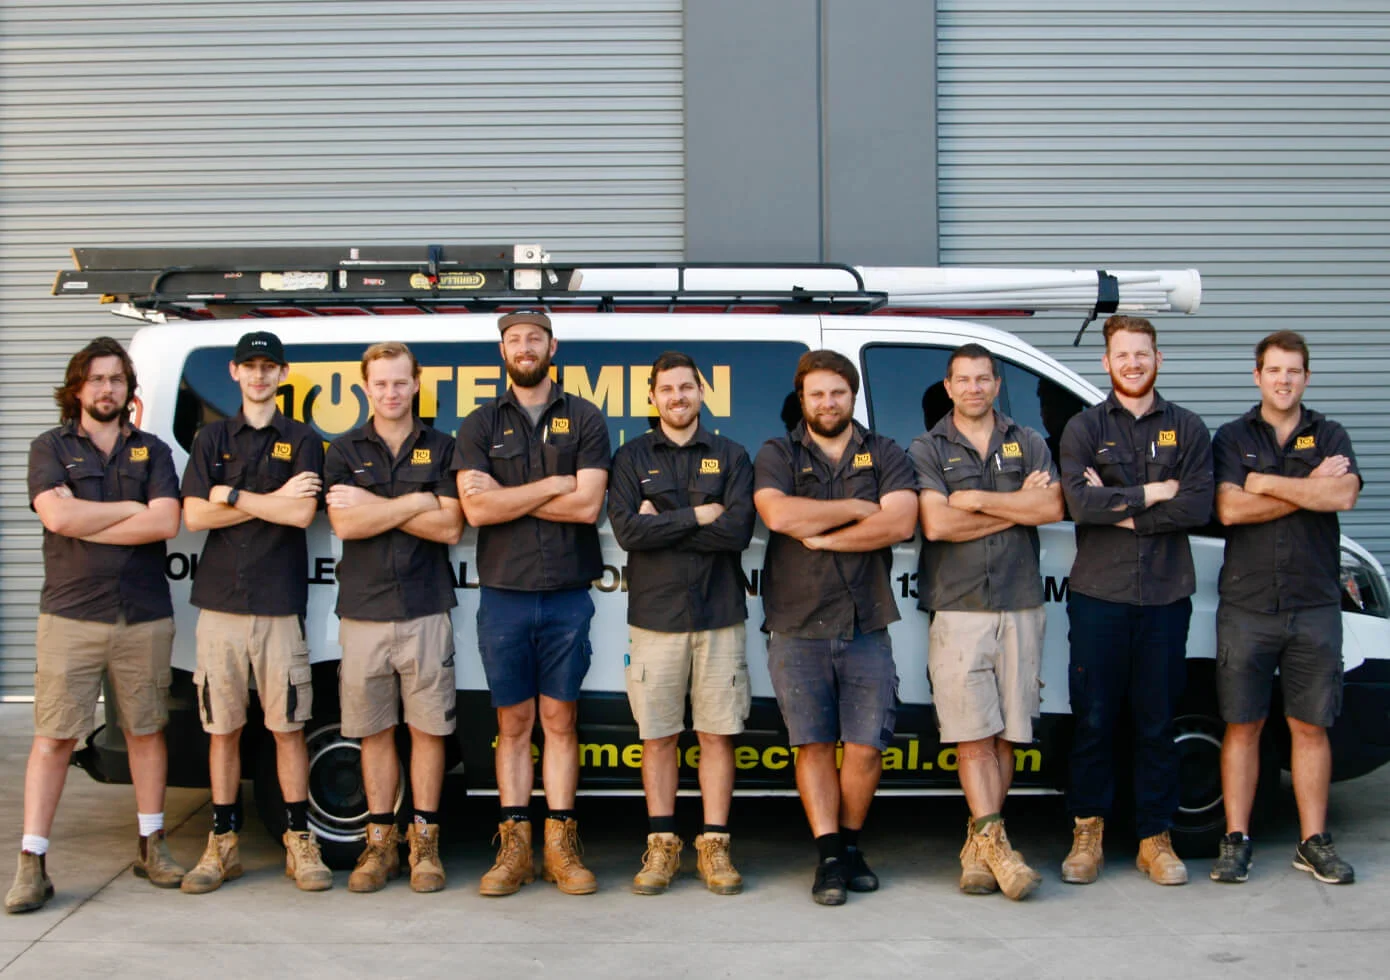 The Tenmen Electrical team of electricians standing in front of a van on the Sunshine Coast.